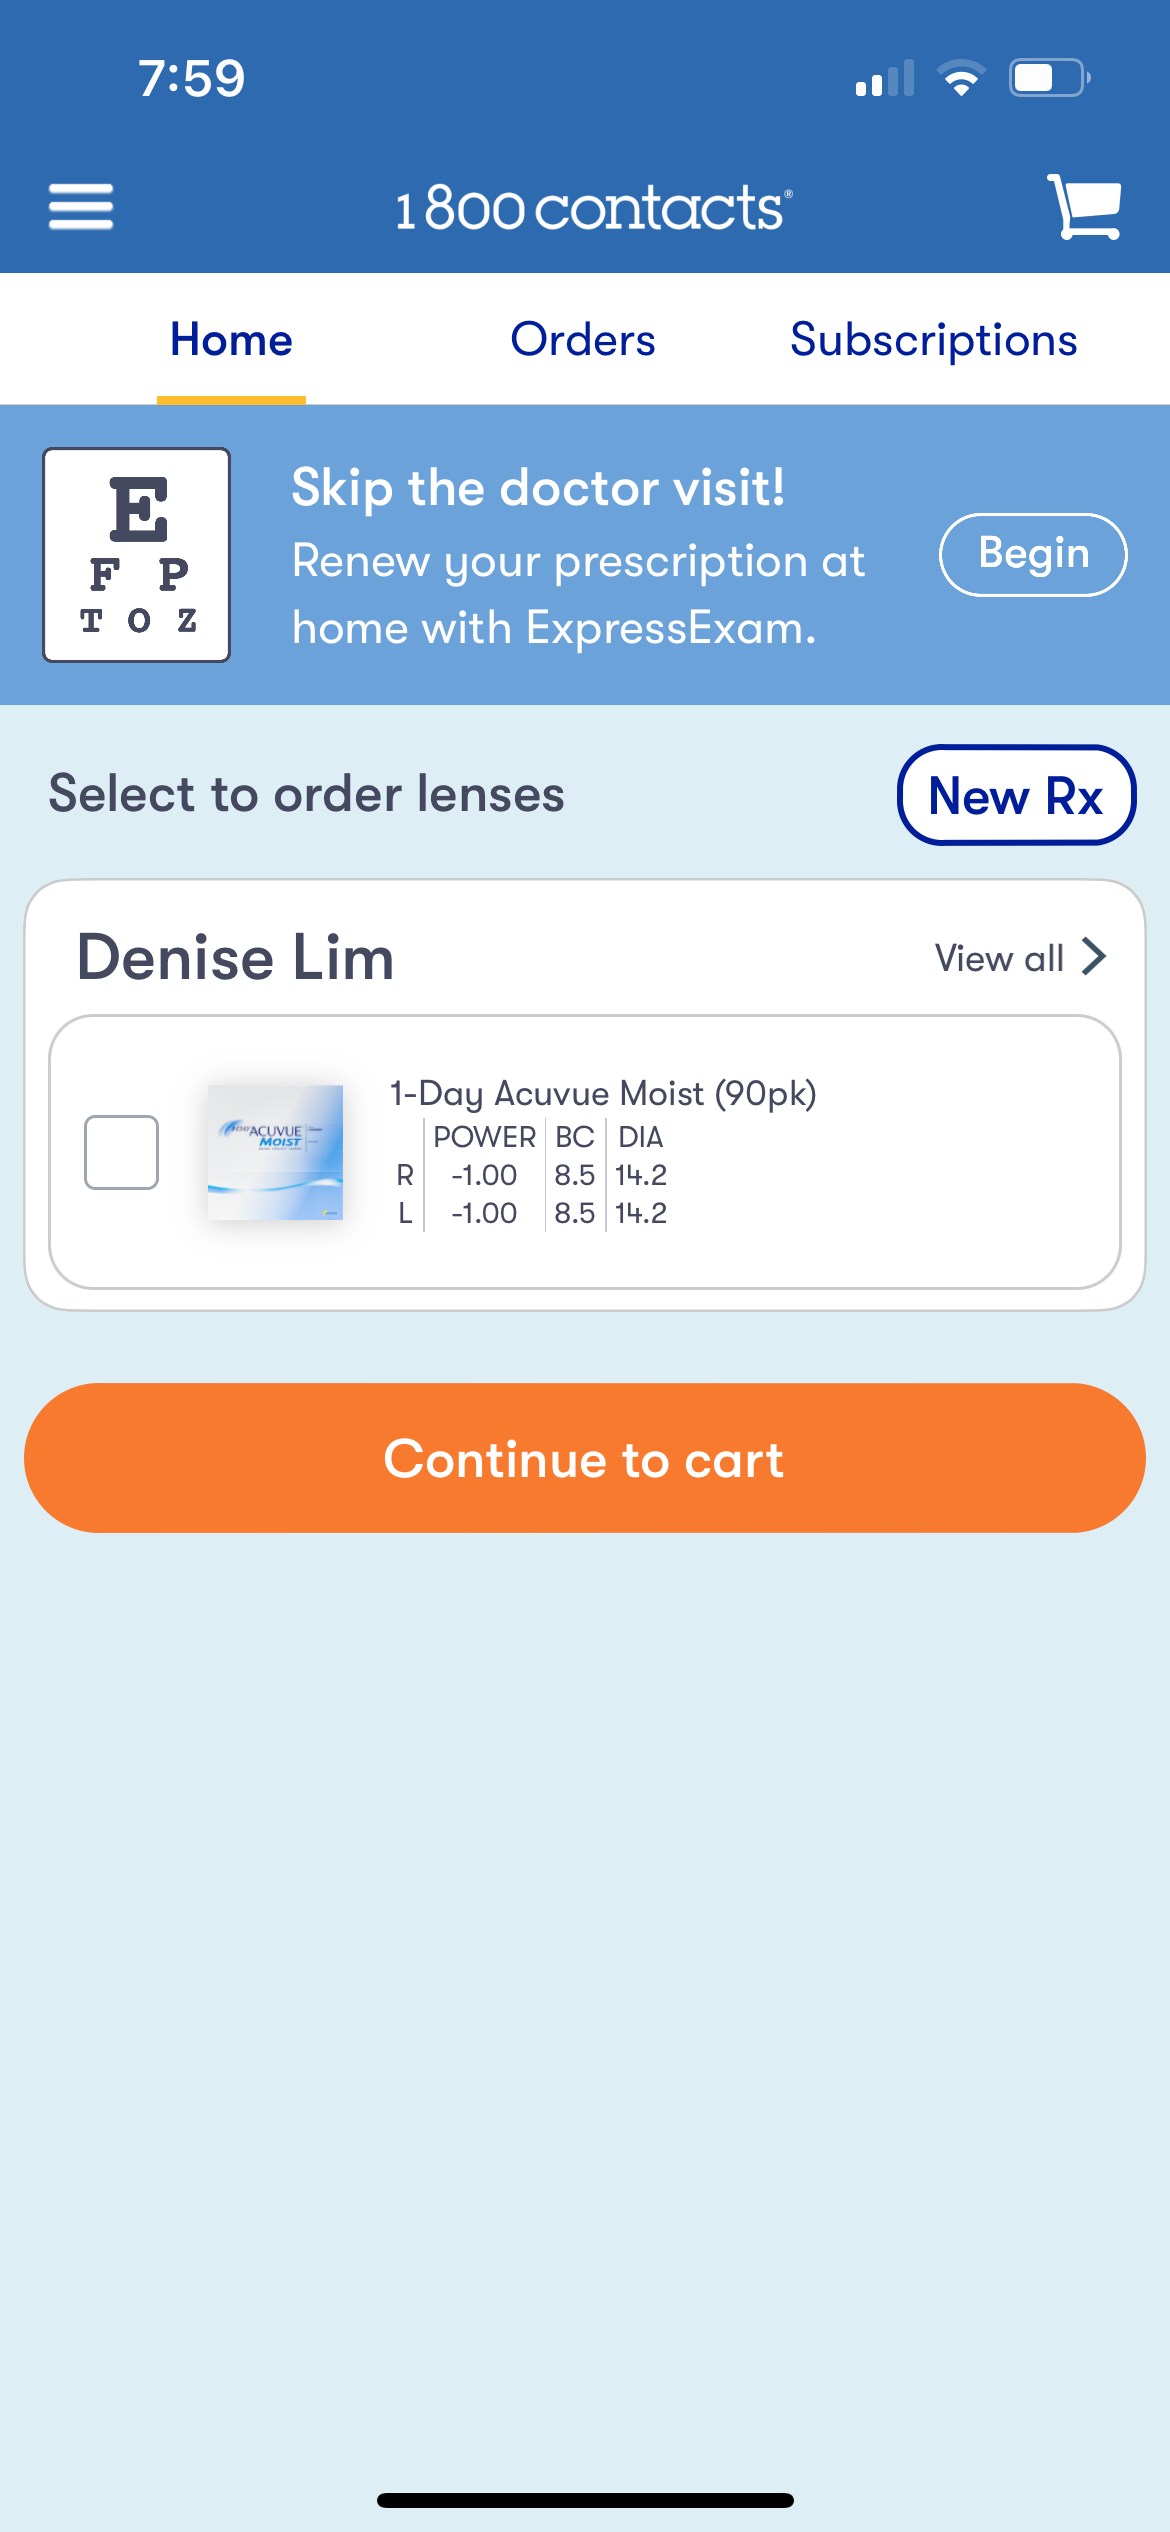 1800 contacts app contacts order